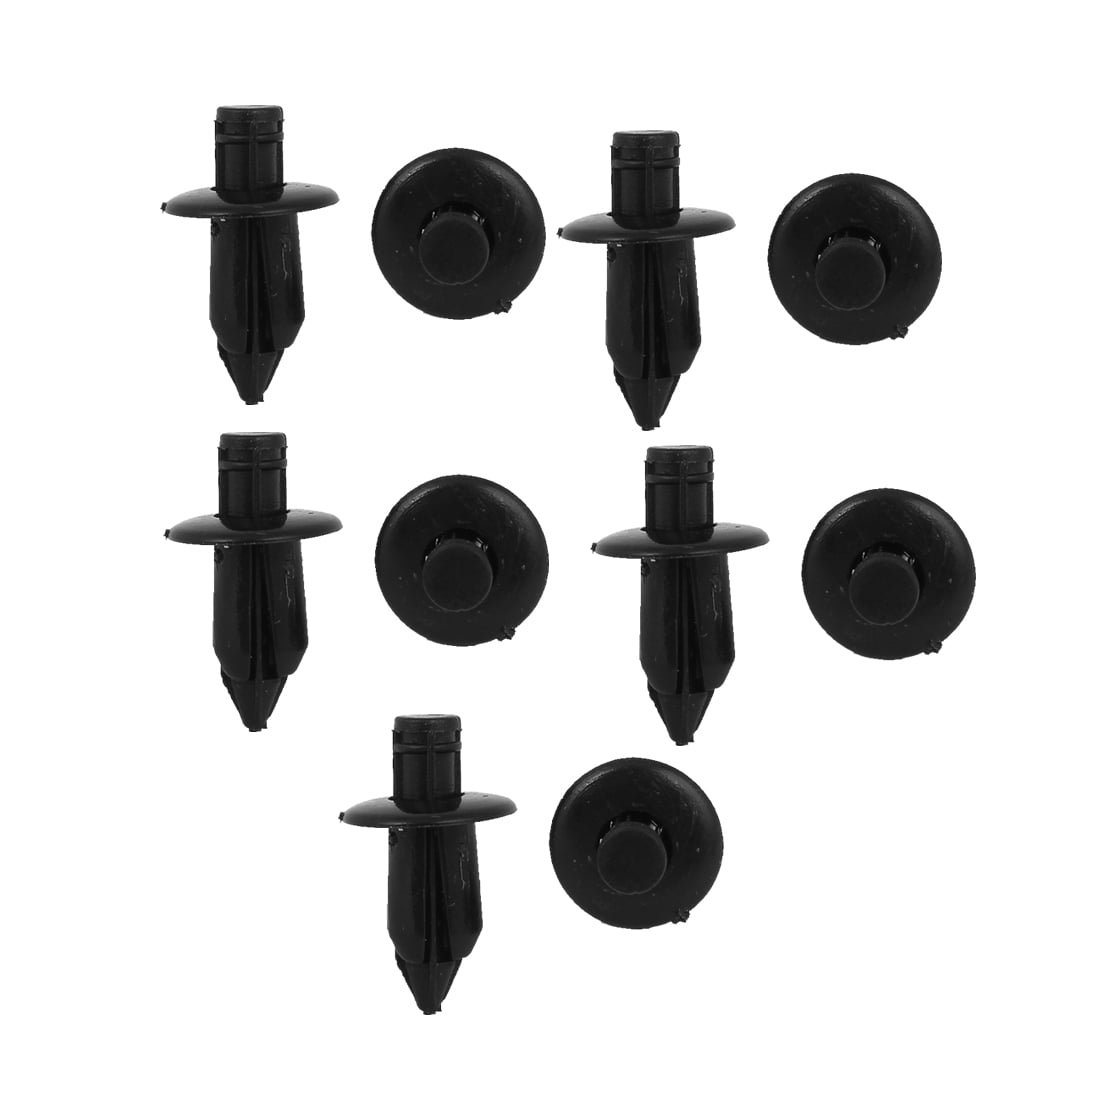 20Pcs Black Push Fit Plastic Fir Tree Trim Fasteners Clips Fit for Land Rover 